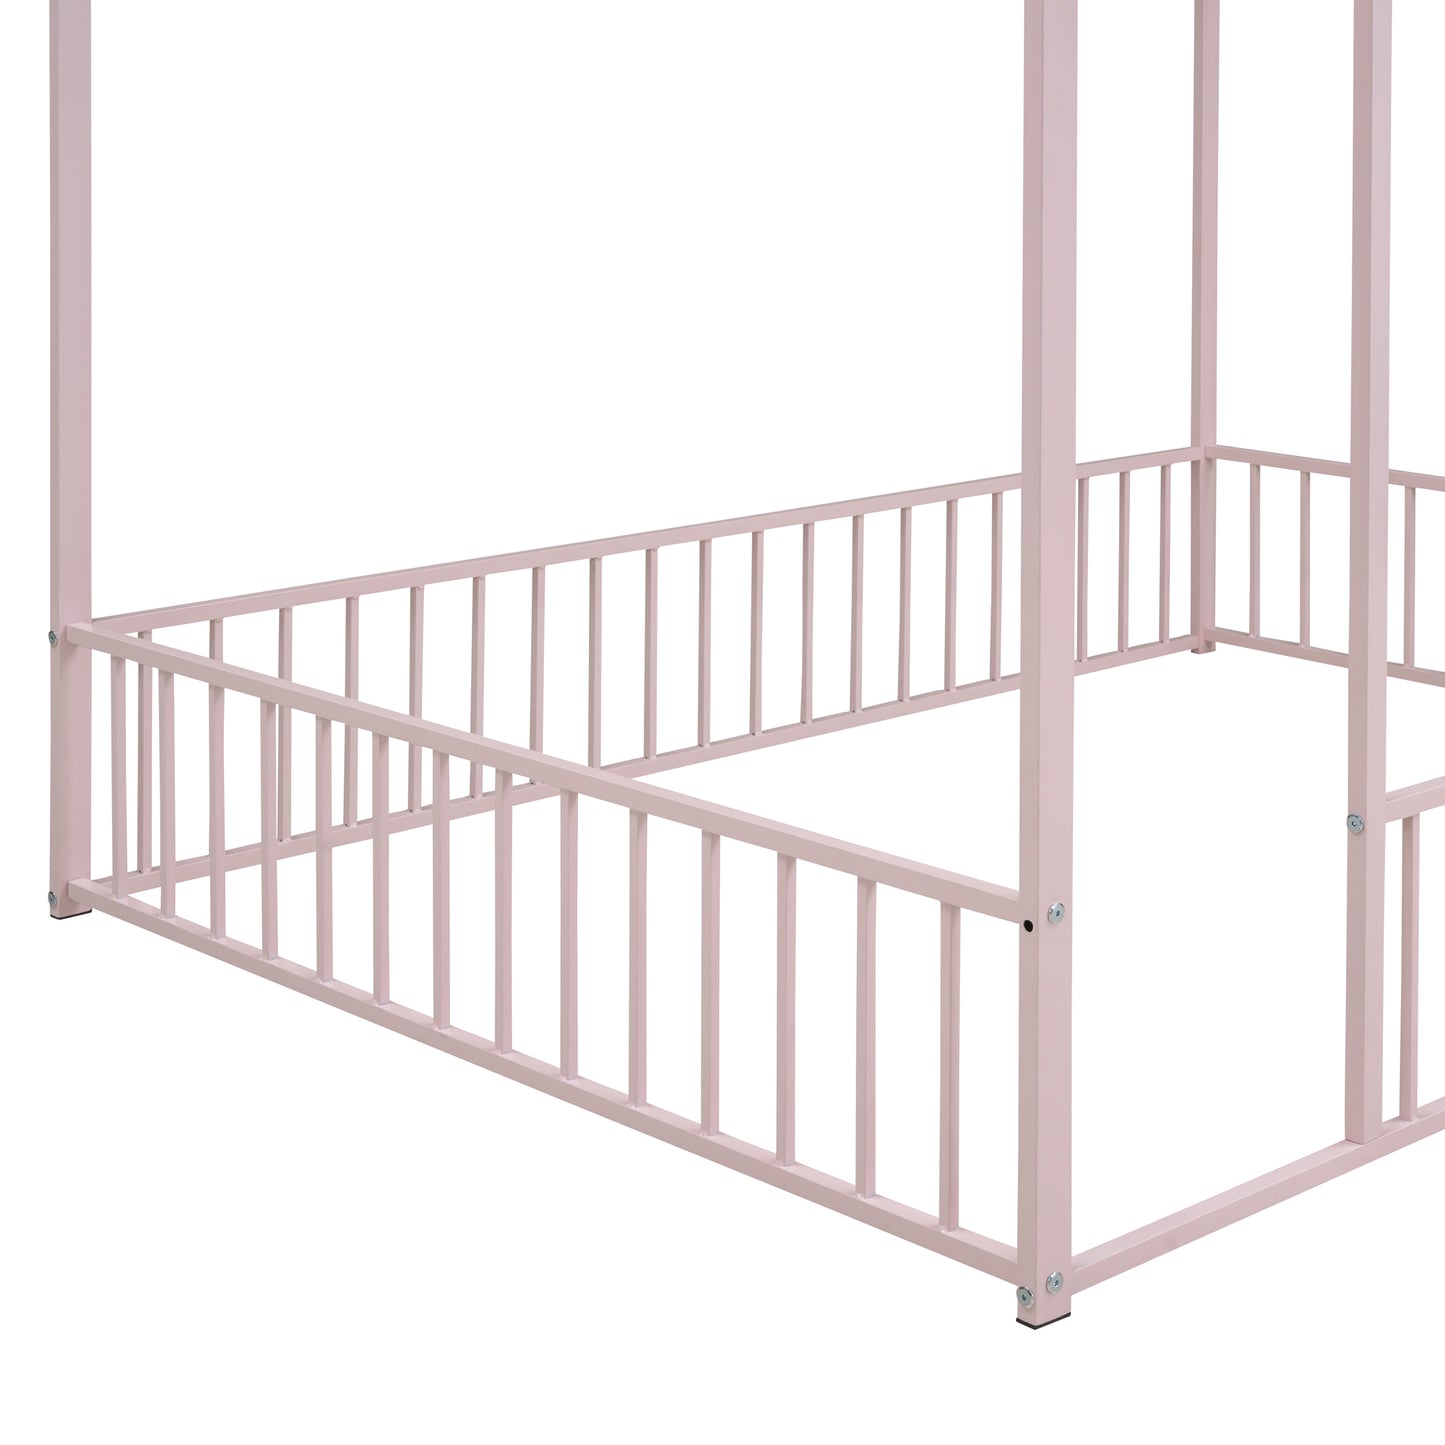 Full Size Metal Bed House Bed Frame with Fence, for Kids, Teens, Girls, Boys,Pink